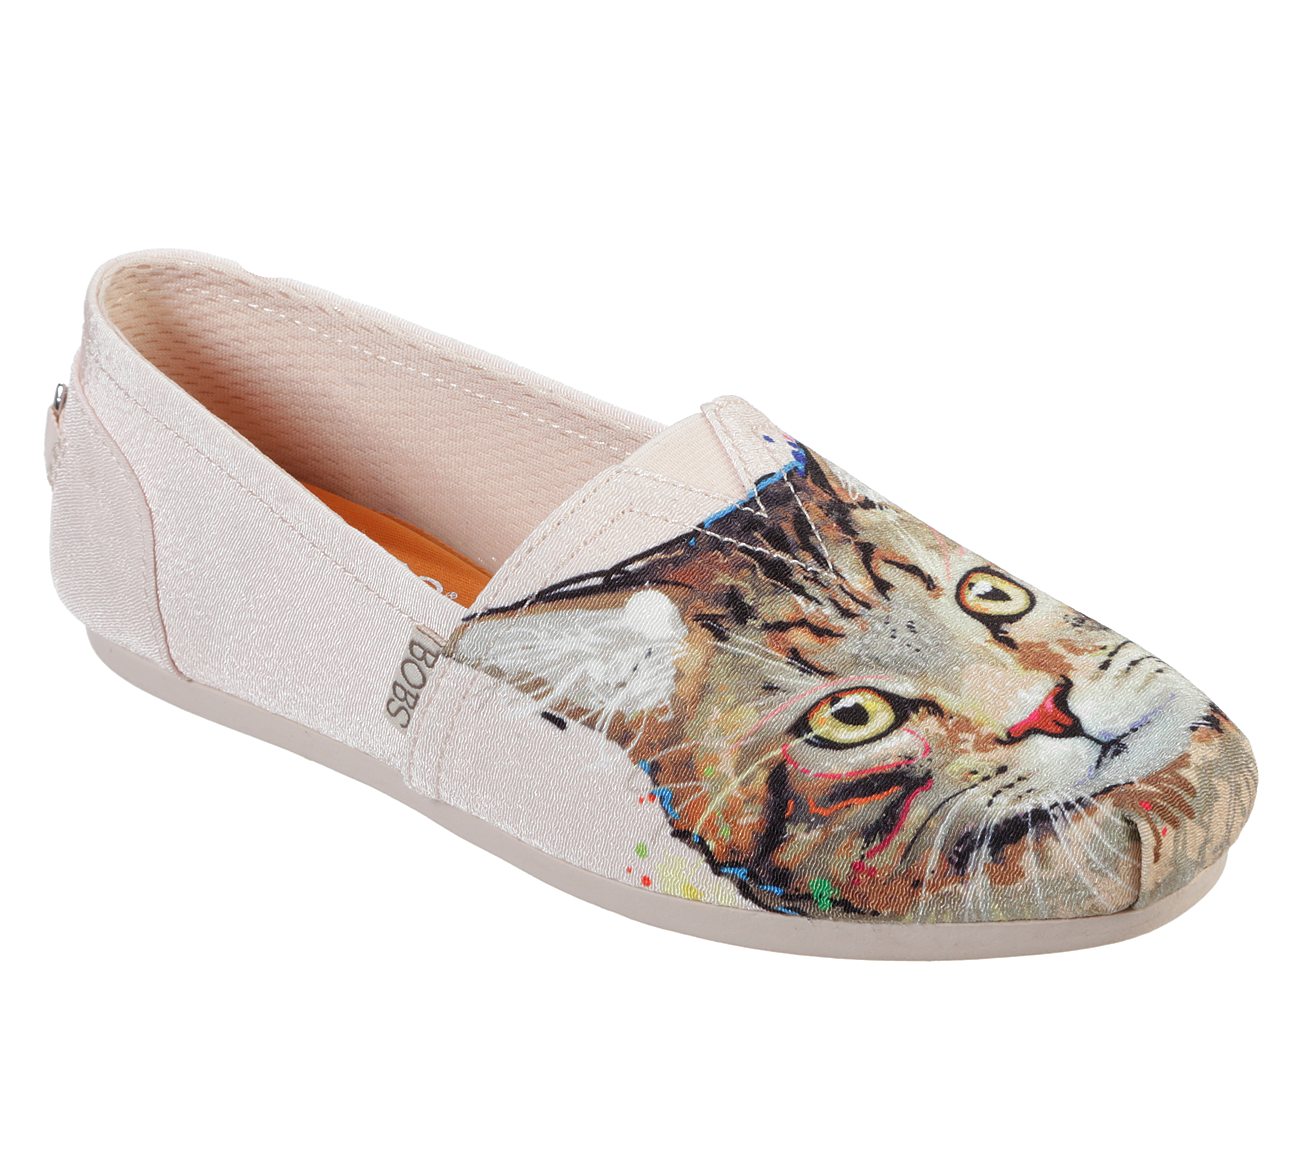 SKECHERS BOBS Plush - Cats Rule BOBS Shoes